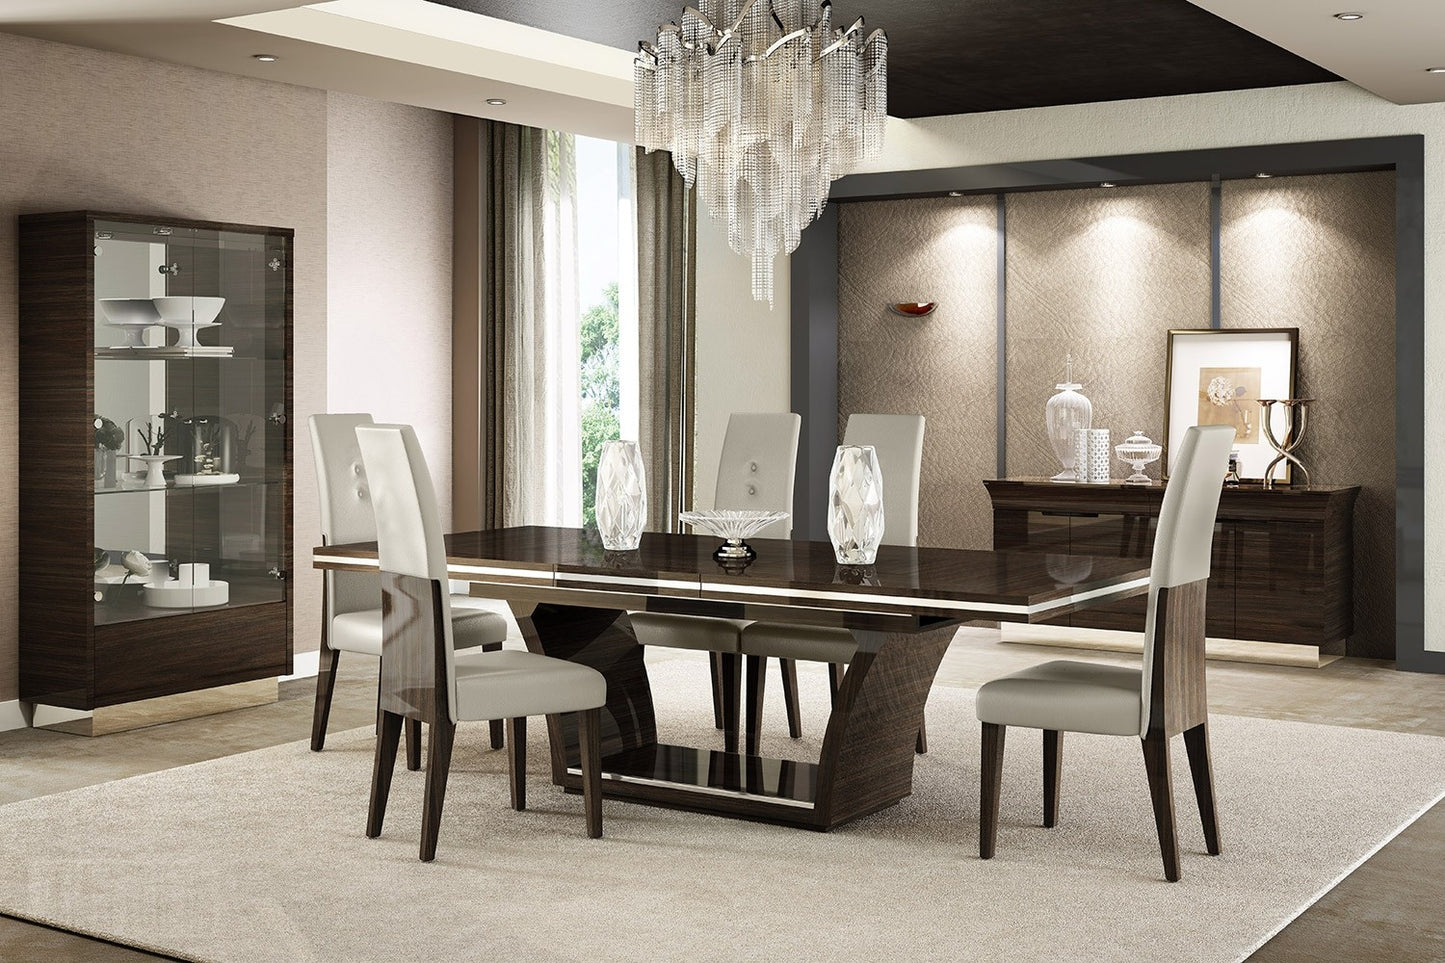 D832 TABLE + 6 CHAIRS DINING SET - WENGE